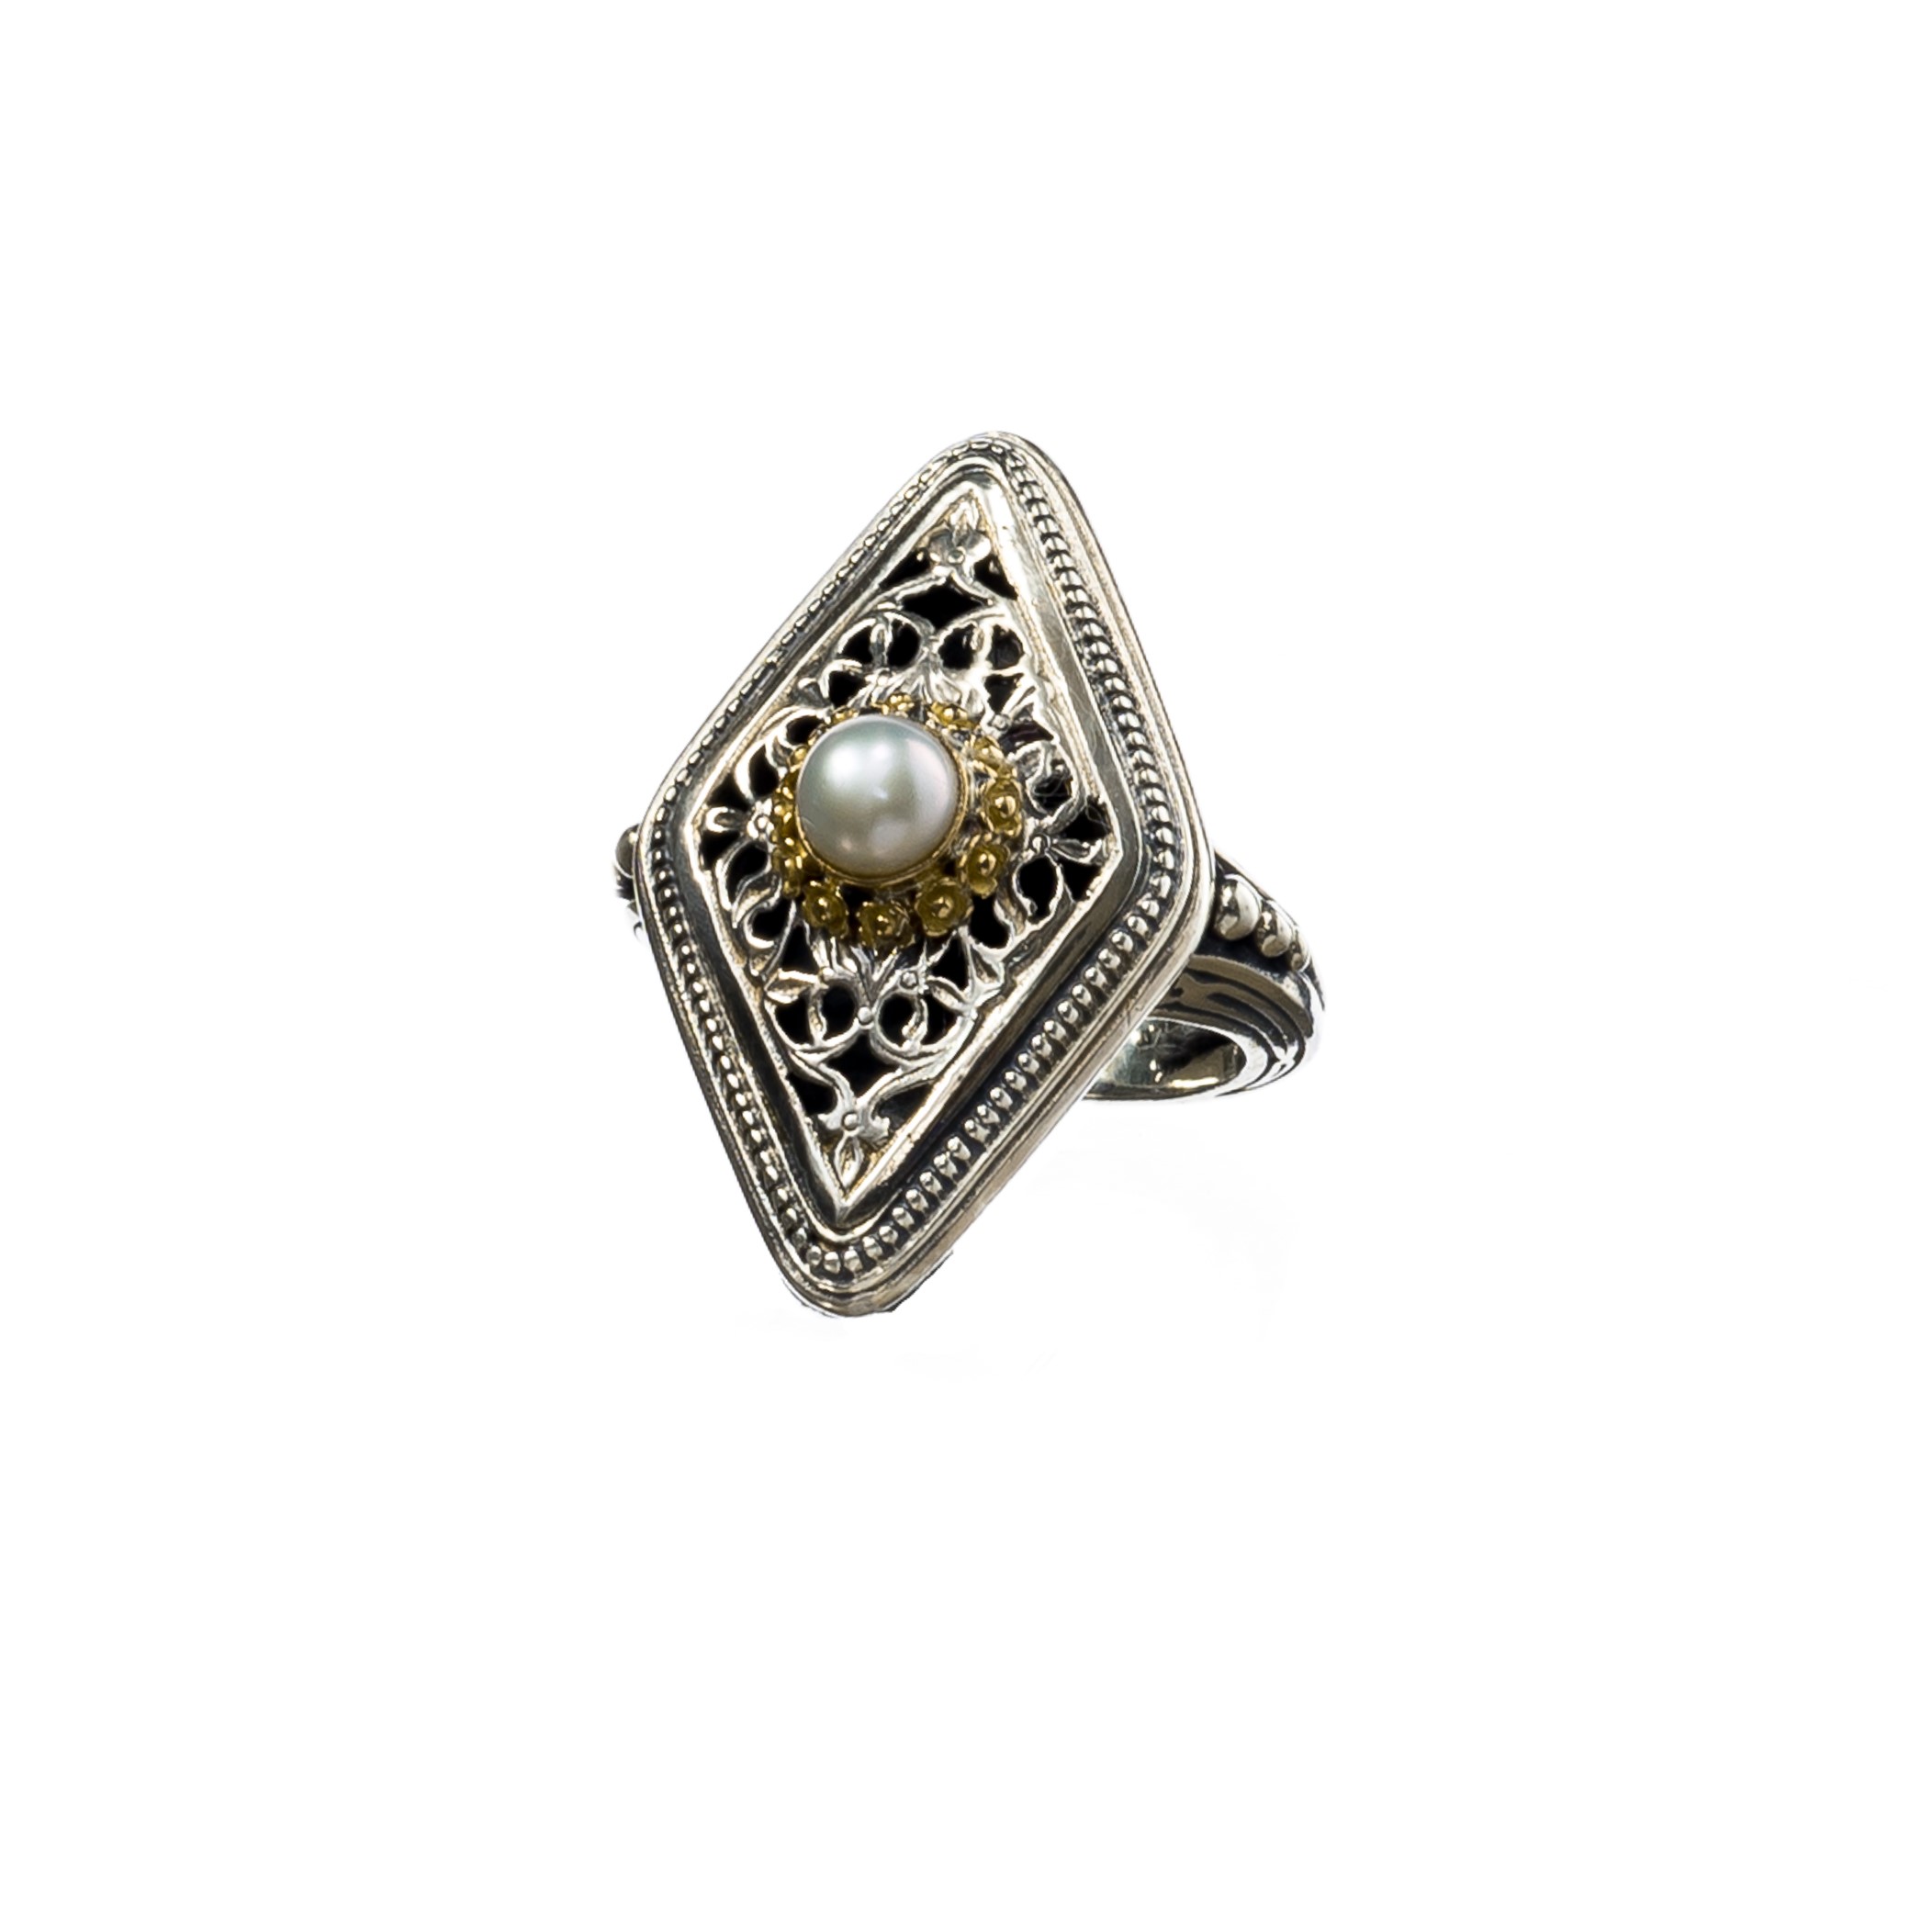 Garden shadows ring in 18K Gold and Sterling Silver with pearl